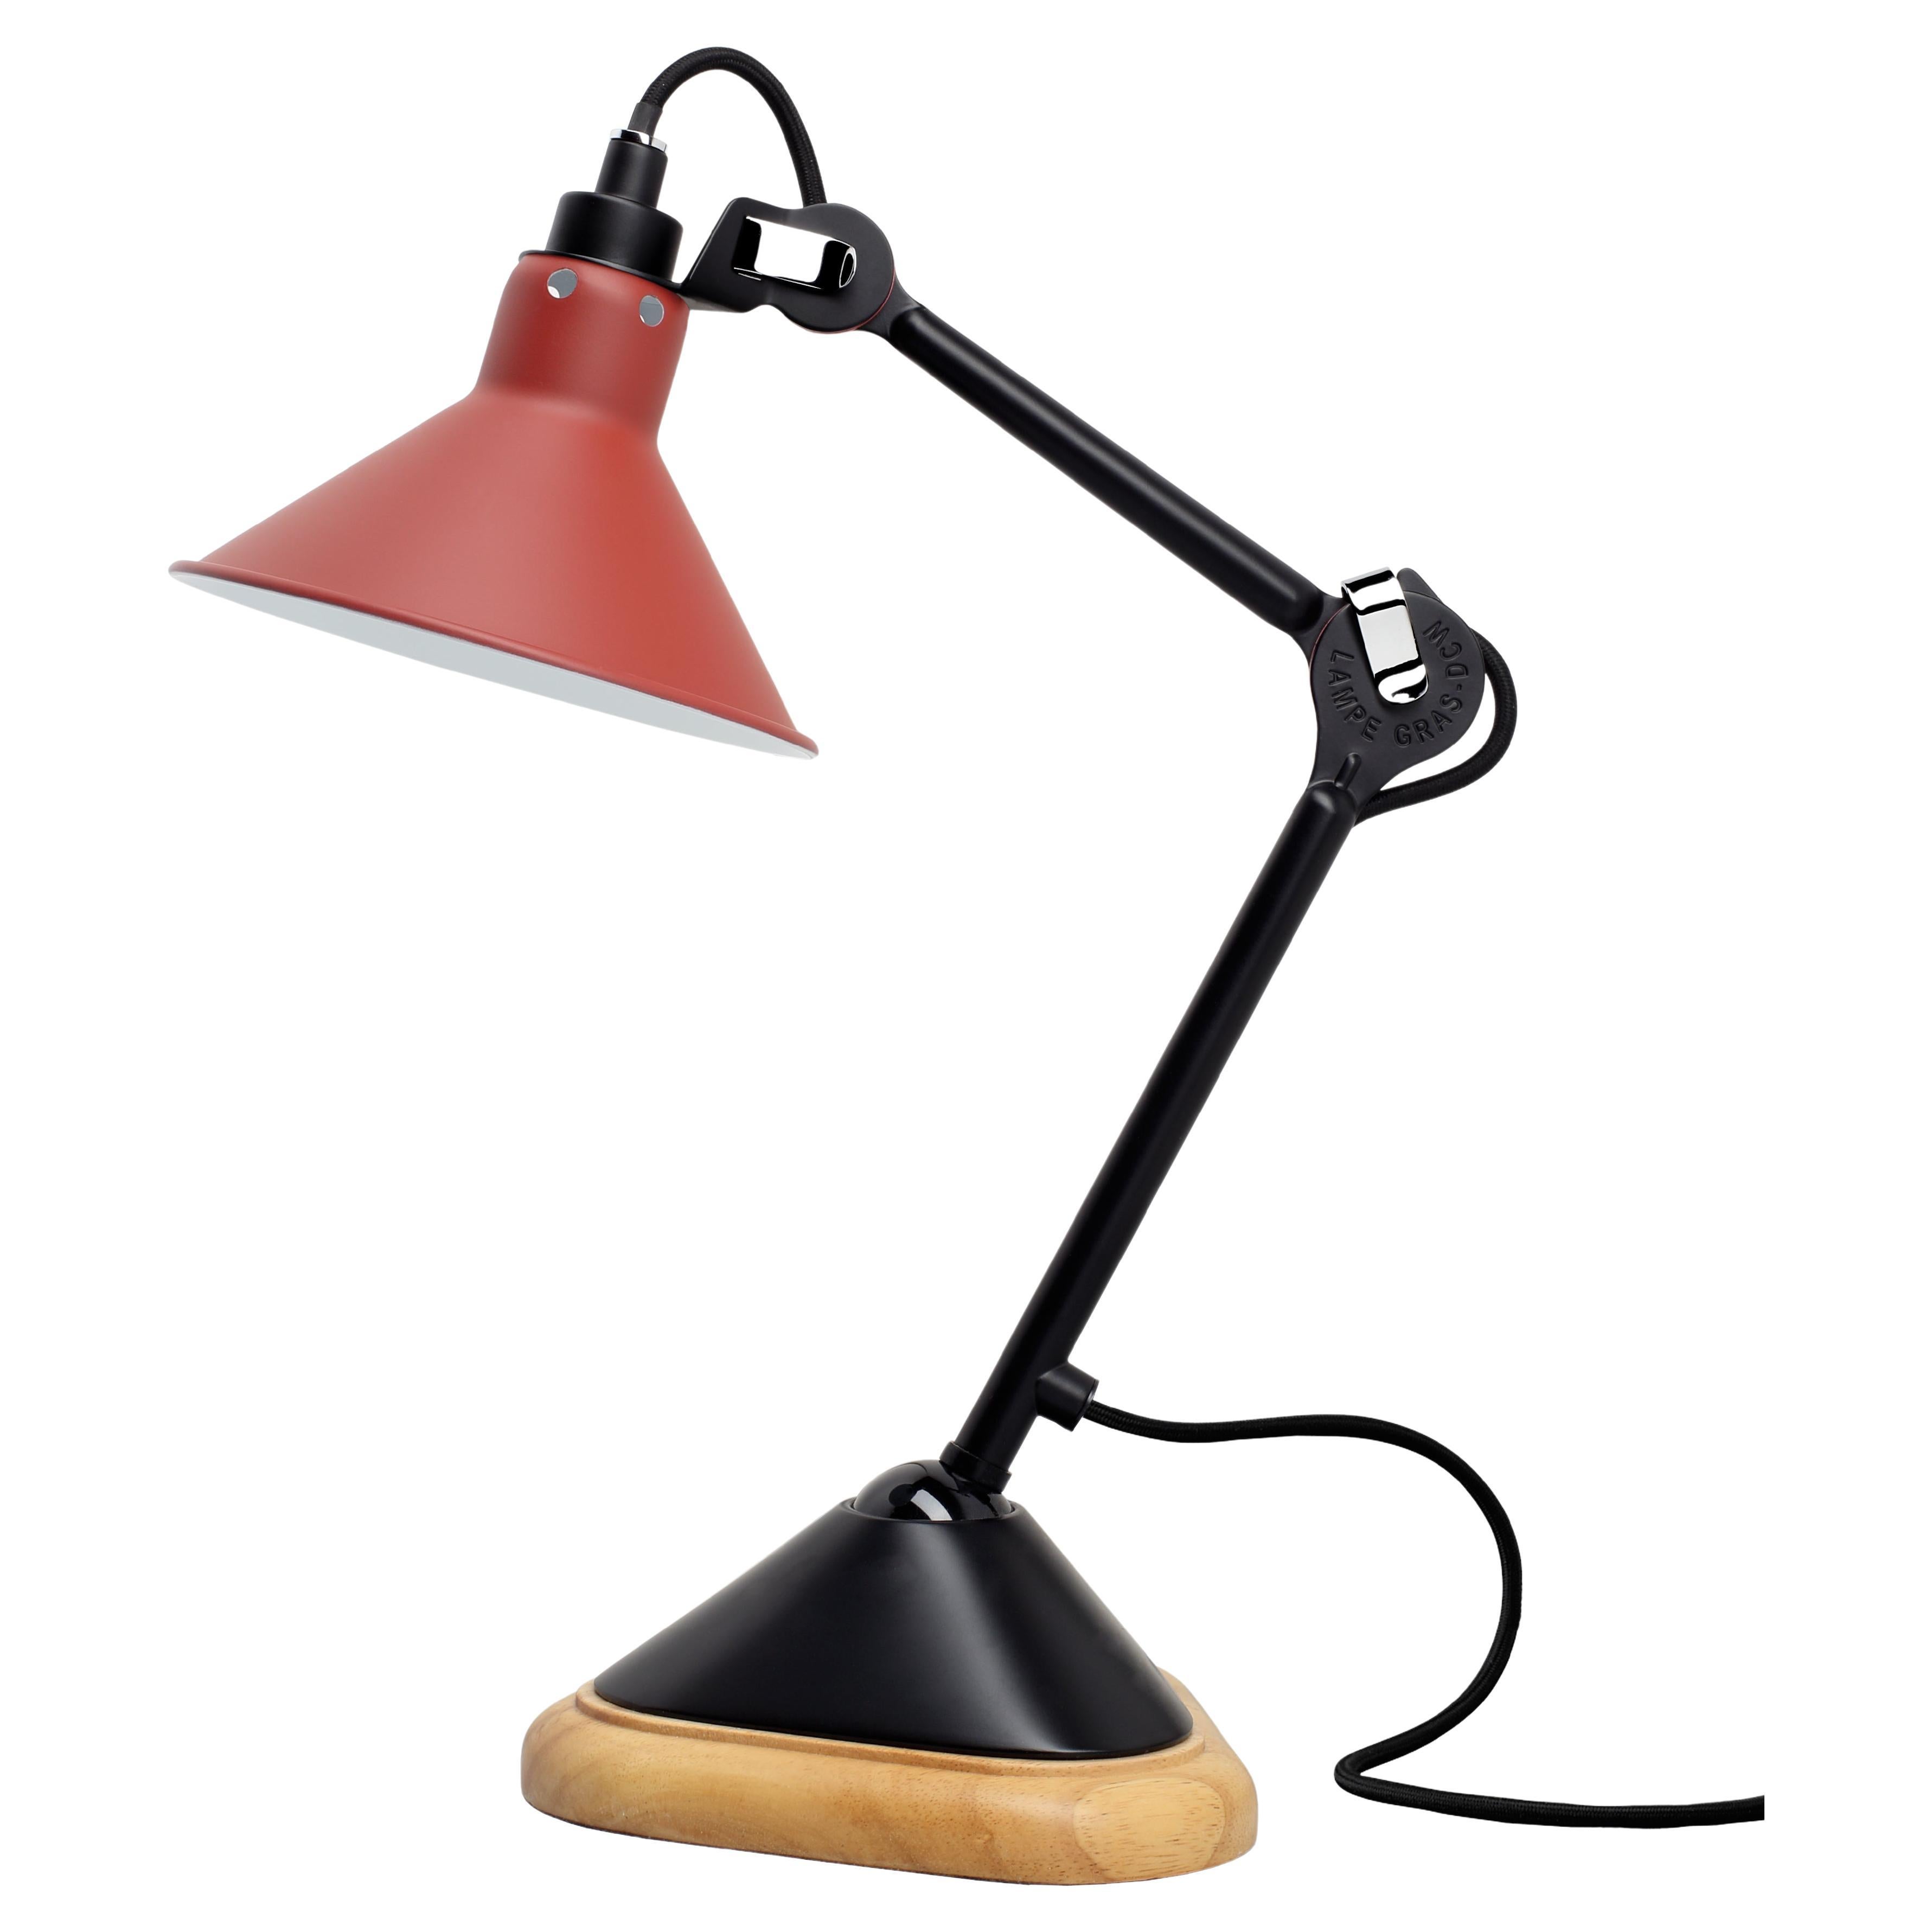 DCW Editions La Lampe Gras N°207 Conic Table Lamp in Black Arm with Red Shade